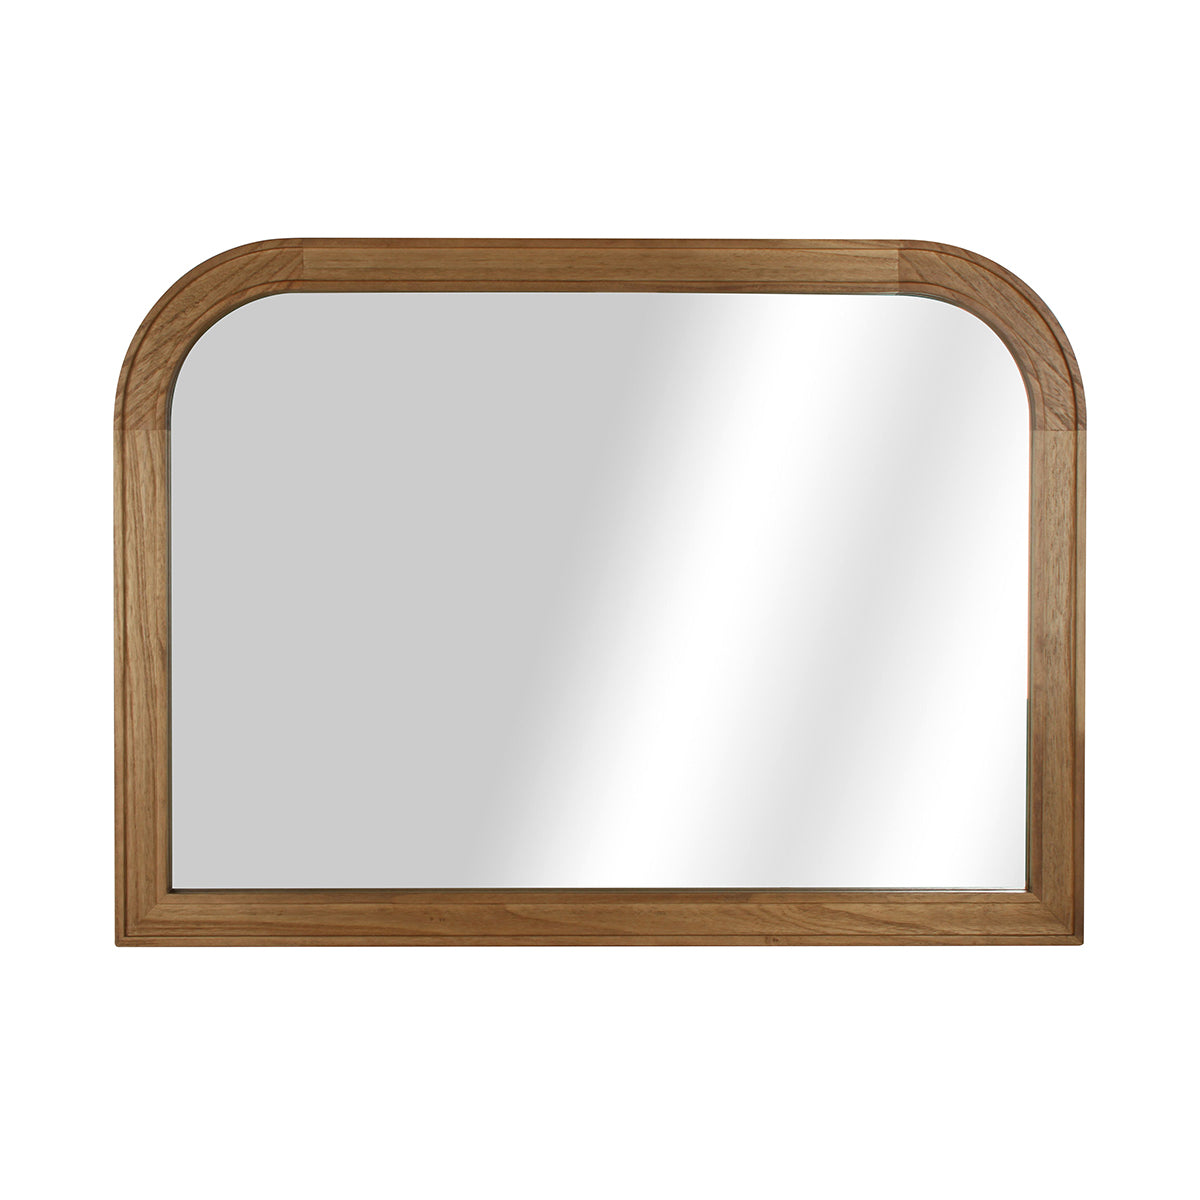 Conni Natural Wood Arched Mantle Mirror 92 x 66cm